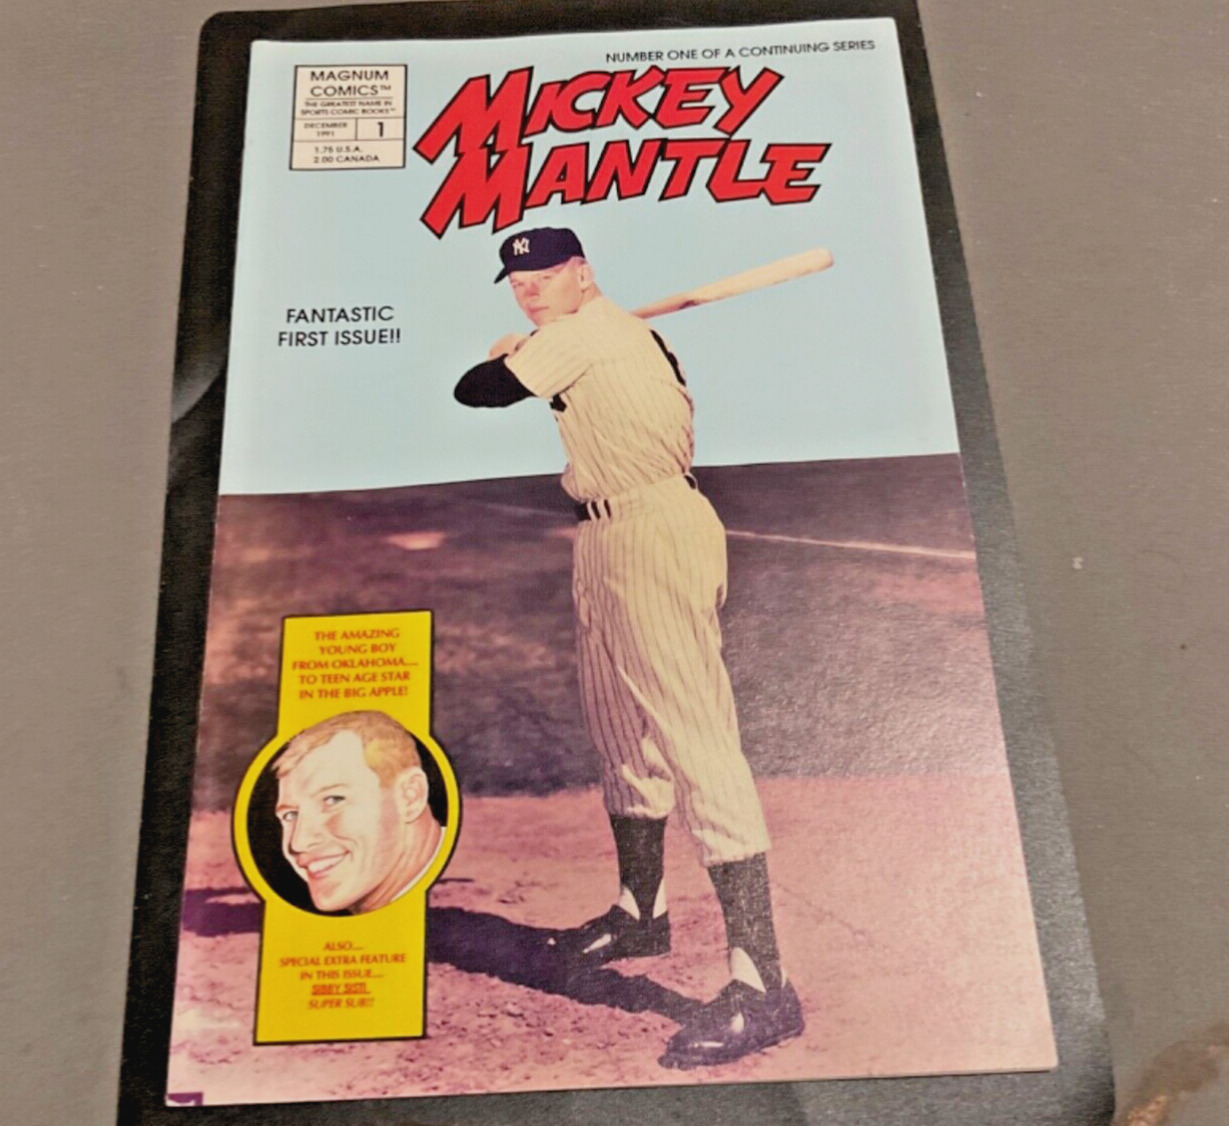 5-1991 Mickey Mantle Comic Books #1 Magnum 1st Issue Brand New New York Yankees